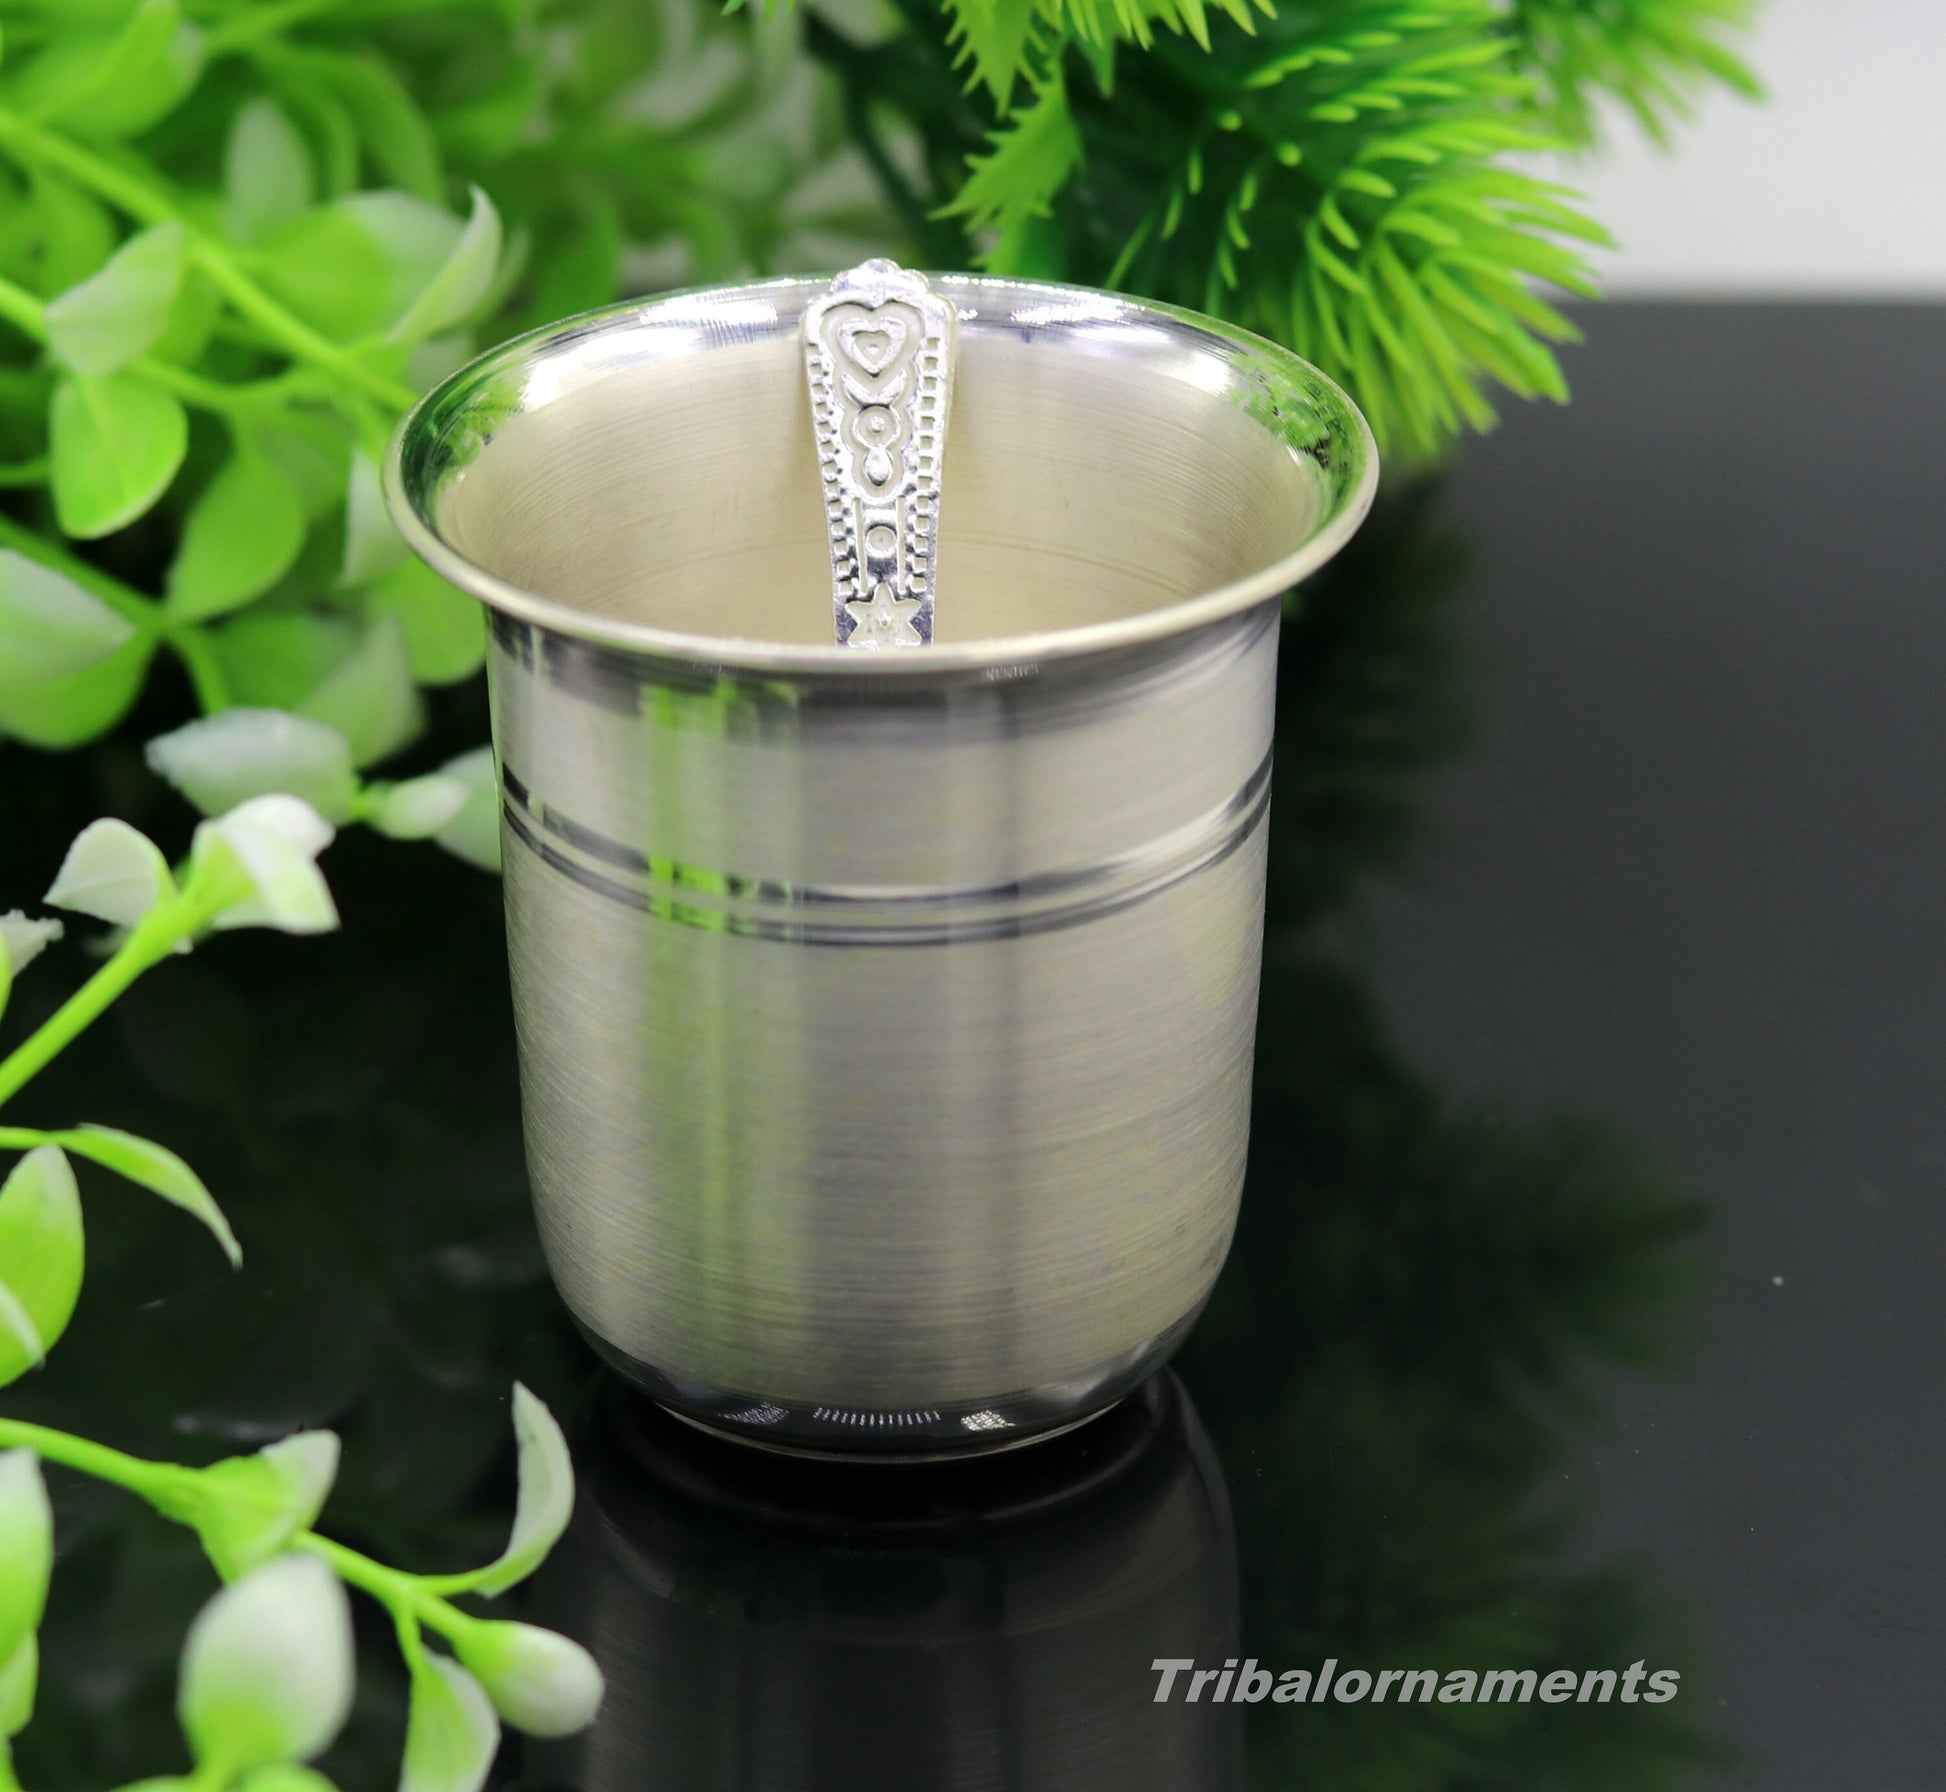 999 fine silver handmade water/milk Glass tumbler, silver flask, baby kids silver utensils set for stay healthy, best gifting article sv137 - TRIBAL ORNAMENTS